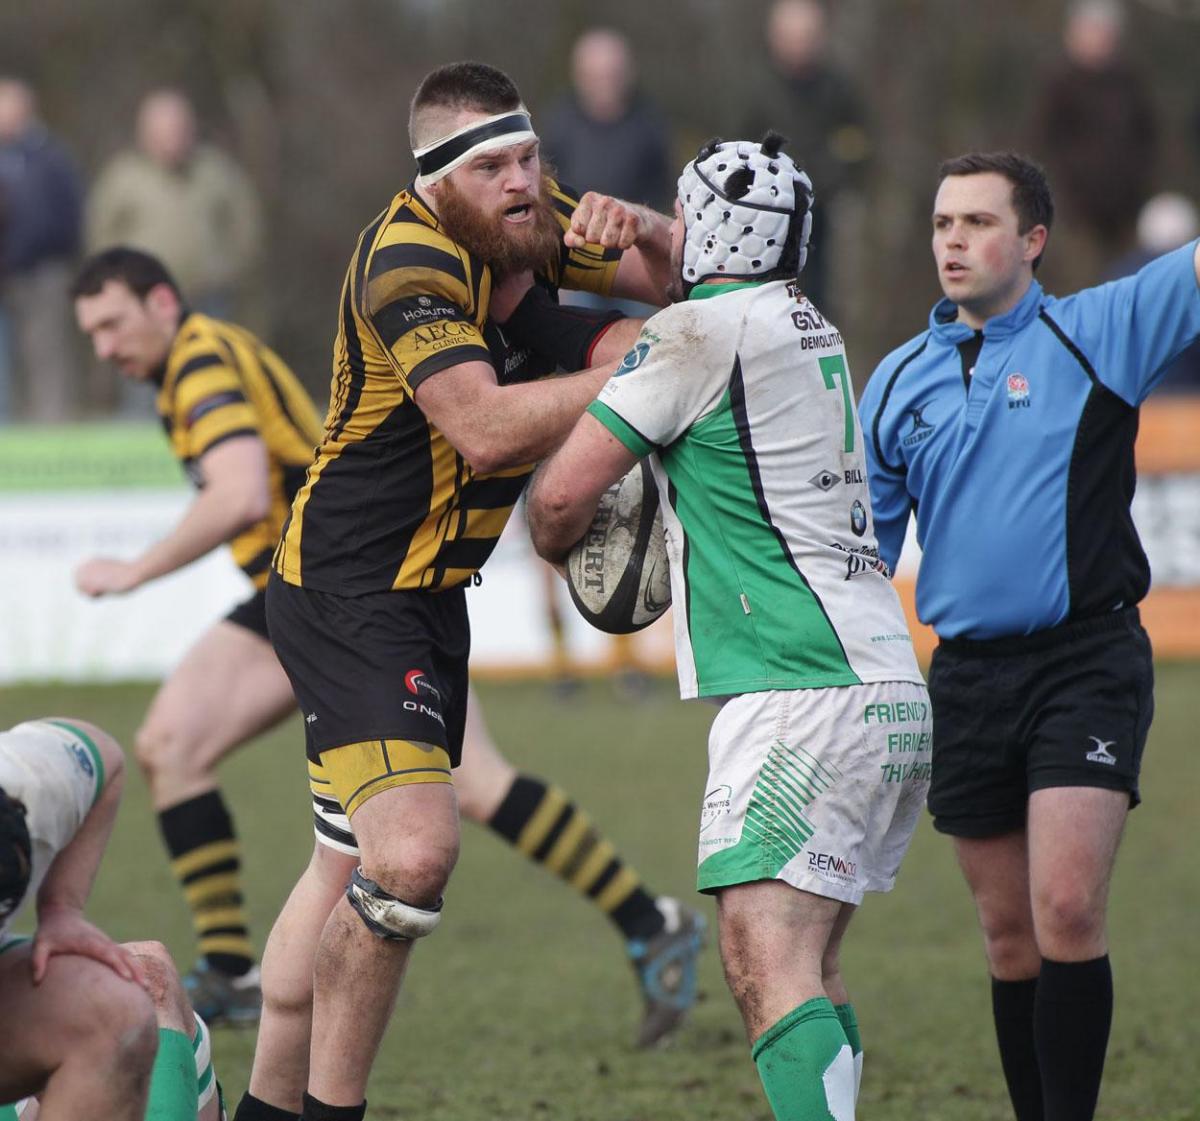 Pictures of Bournemouth v Newton Abbot on Saturday March 7, 2015 by Sam Sheldon. 